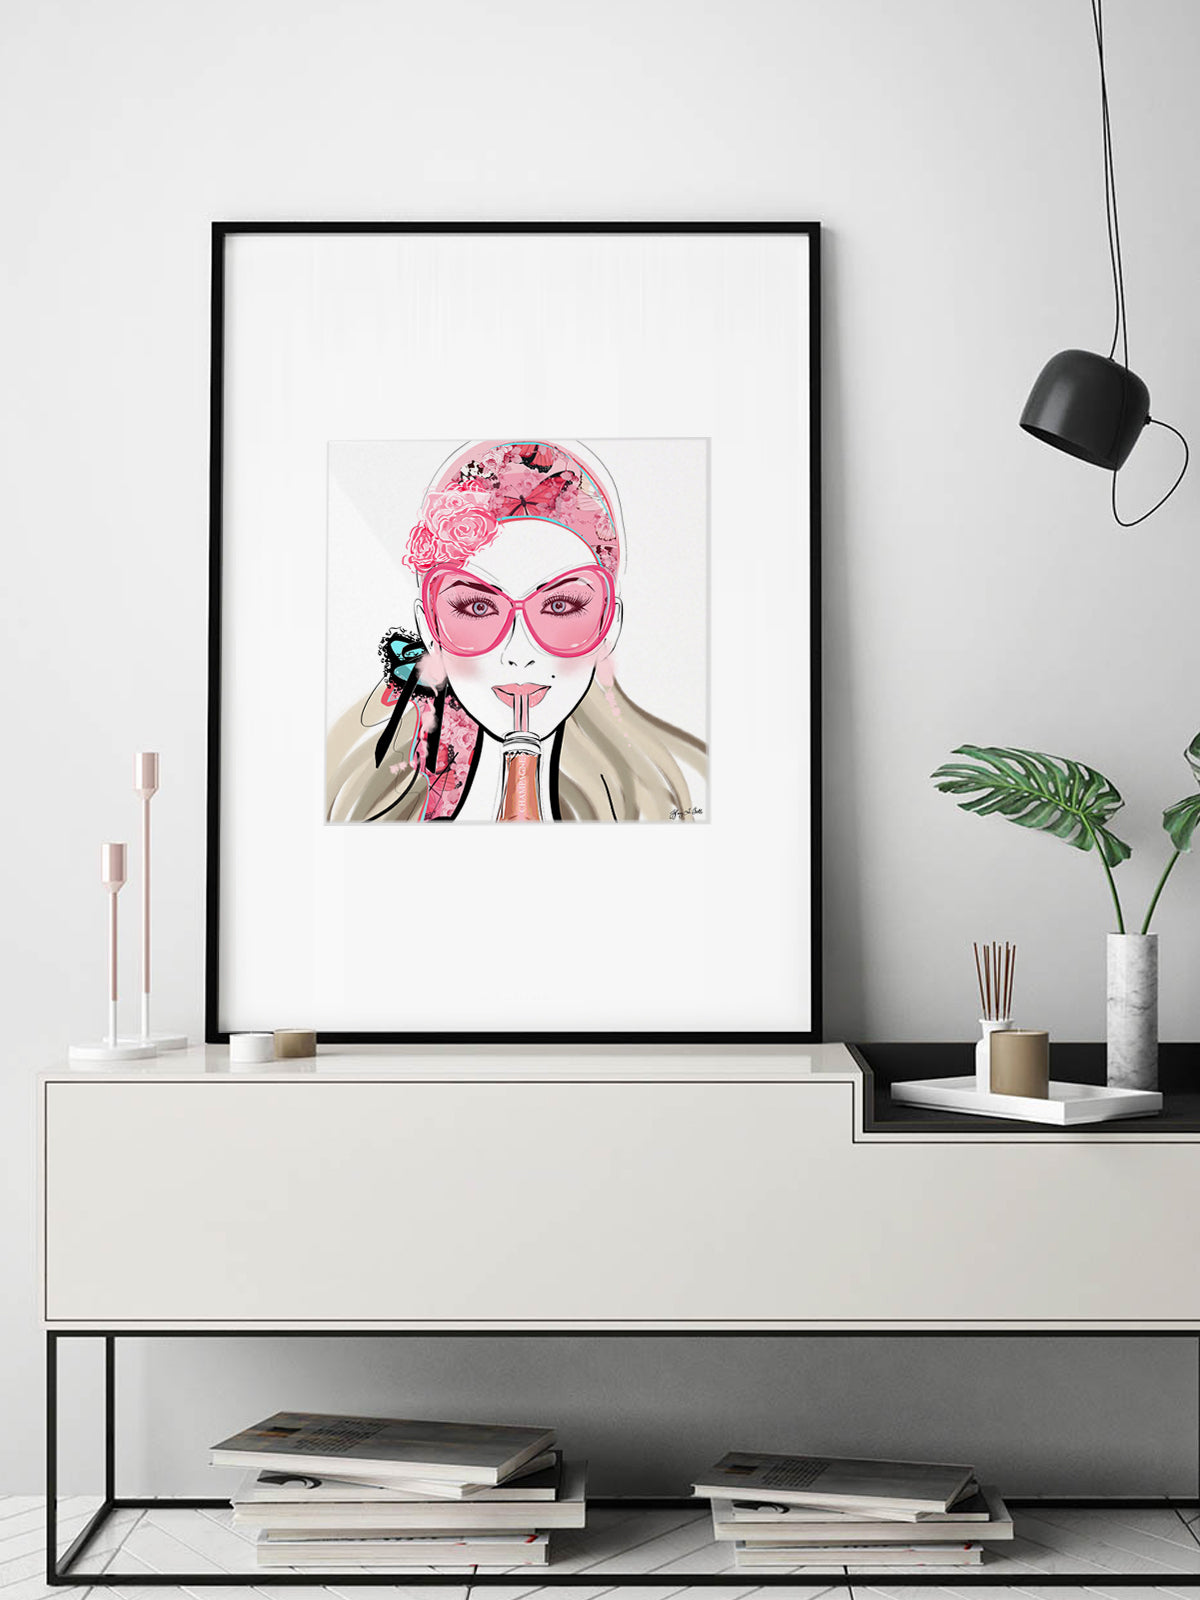 Who Needs a Glass? - Illustration - Limited Edition Print - Tiffany La Belle